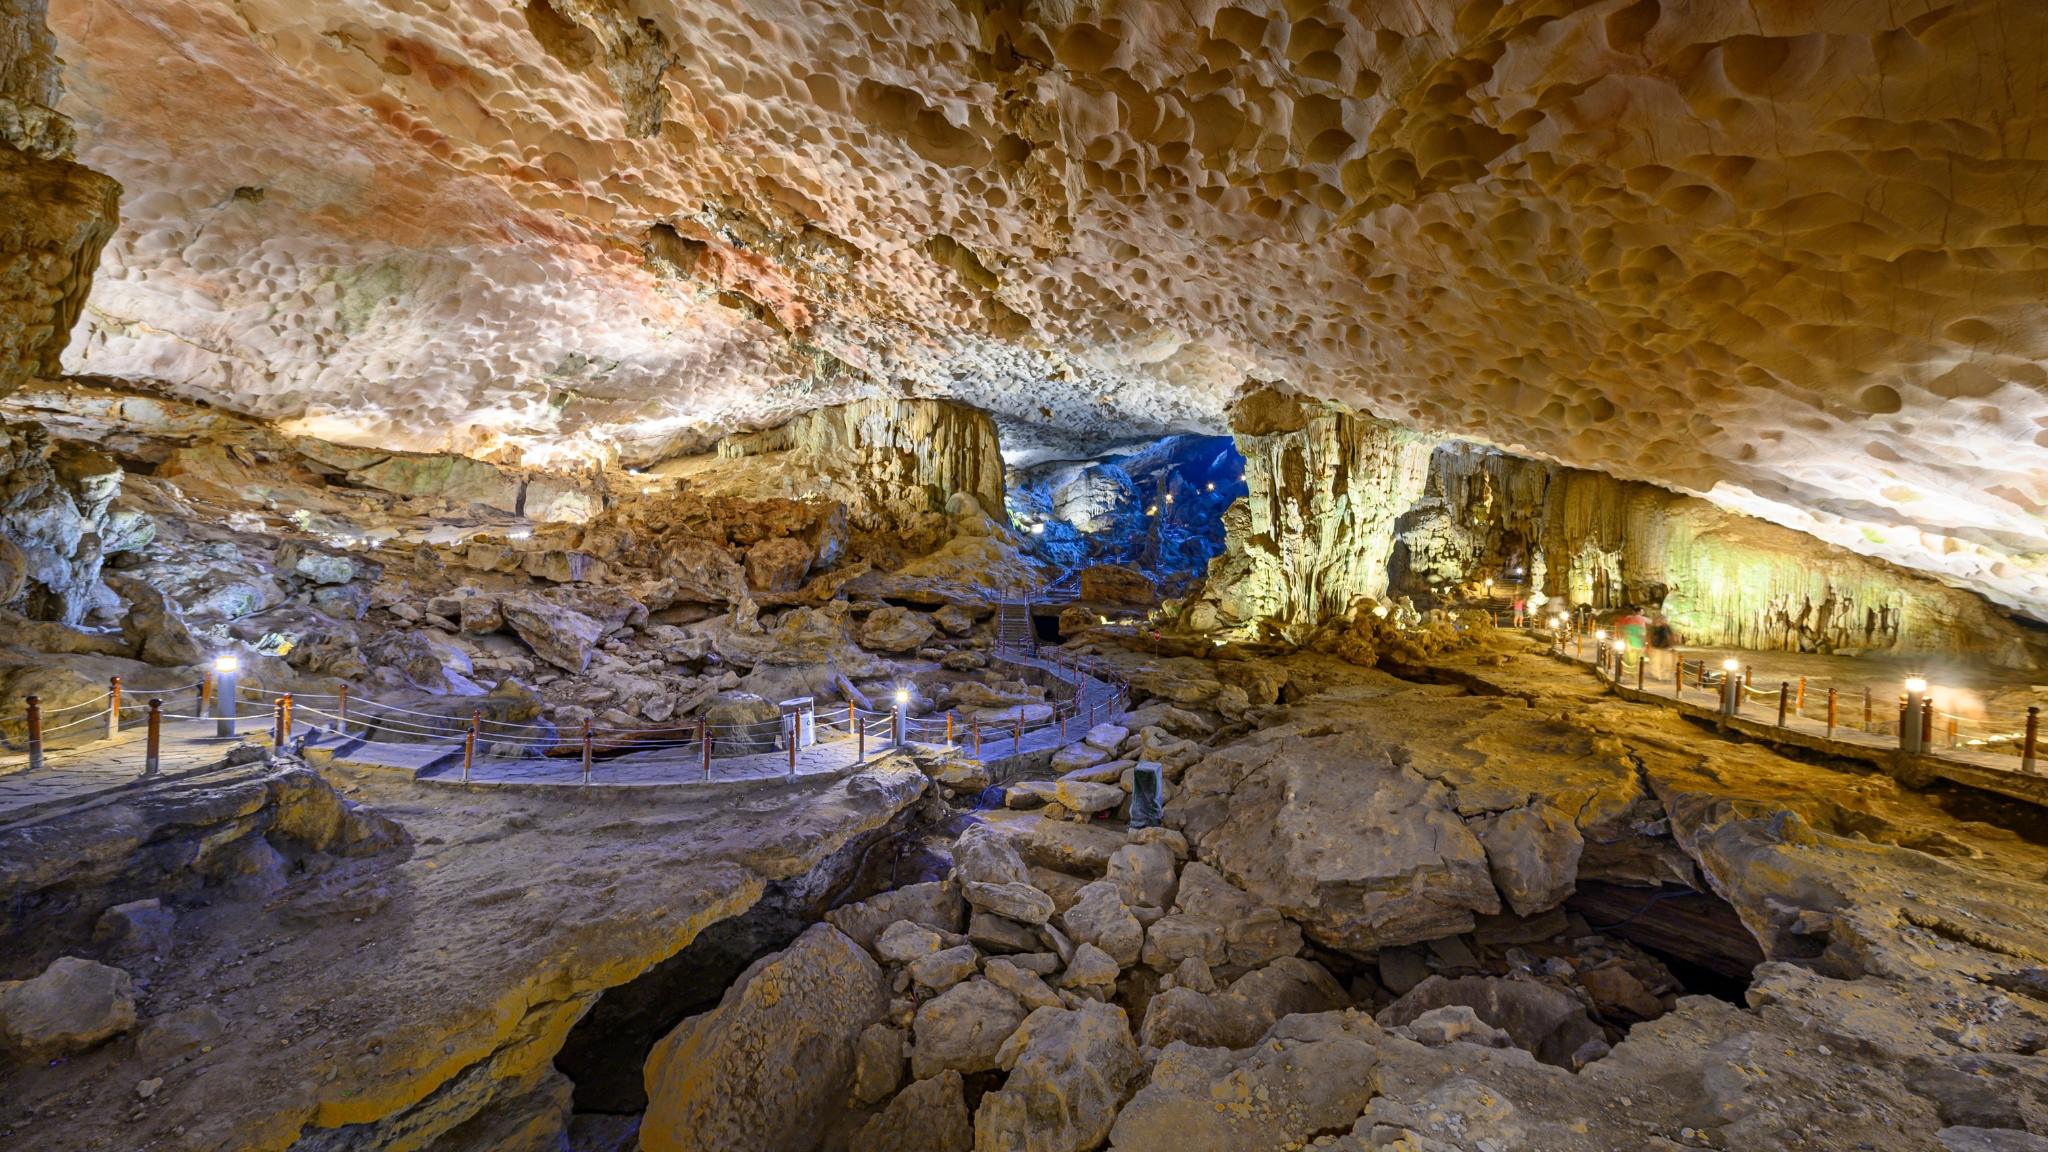 Spectacular view in Sung Sot Cave